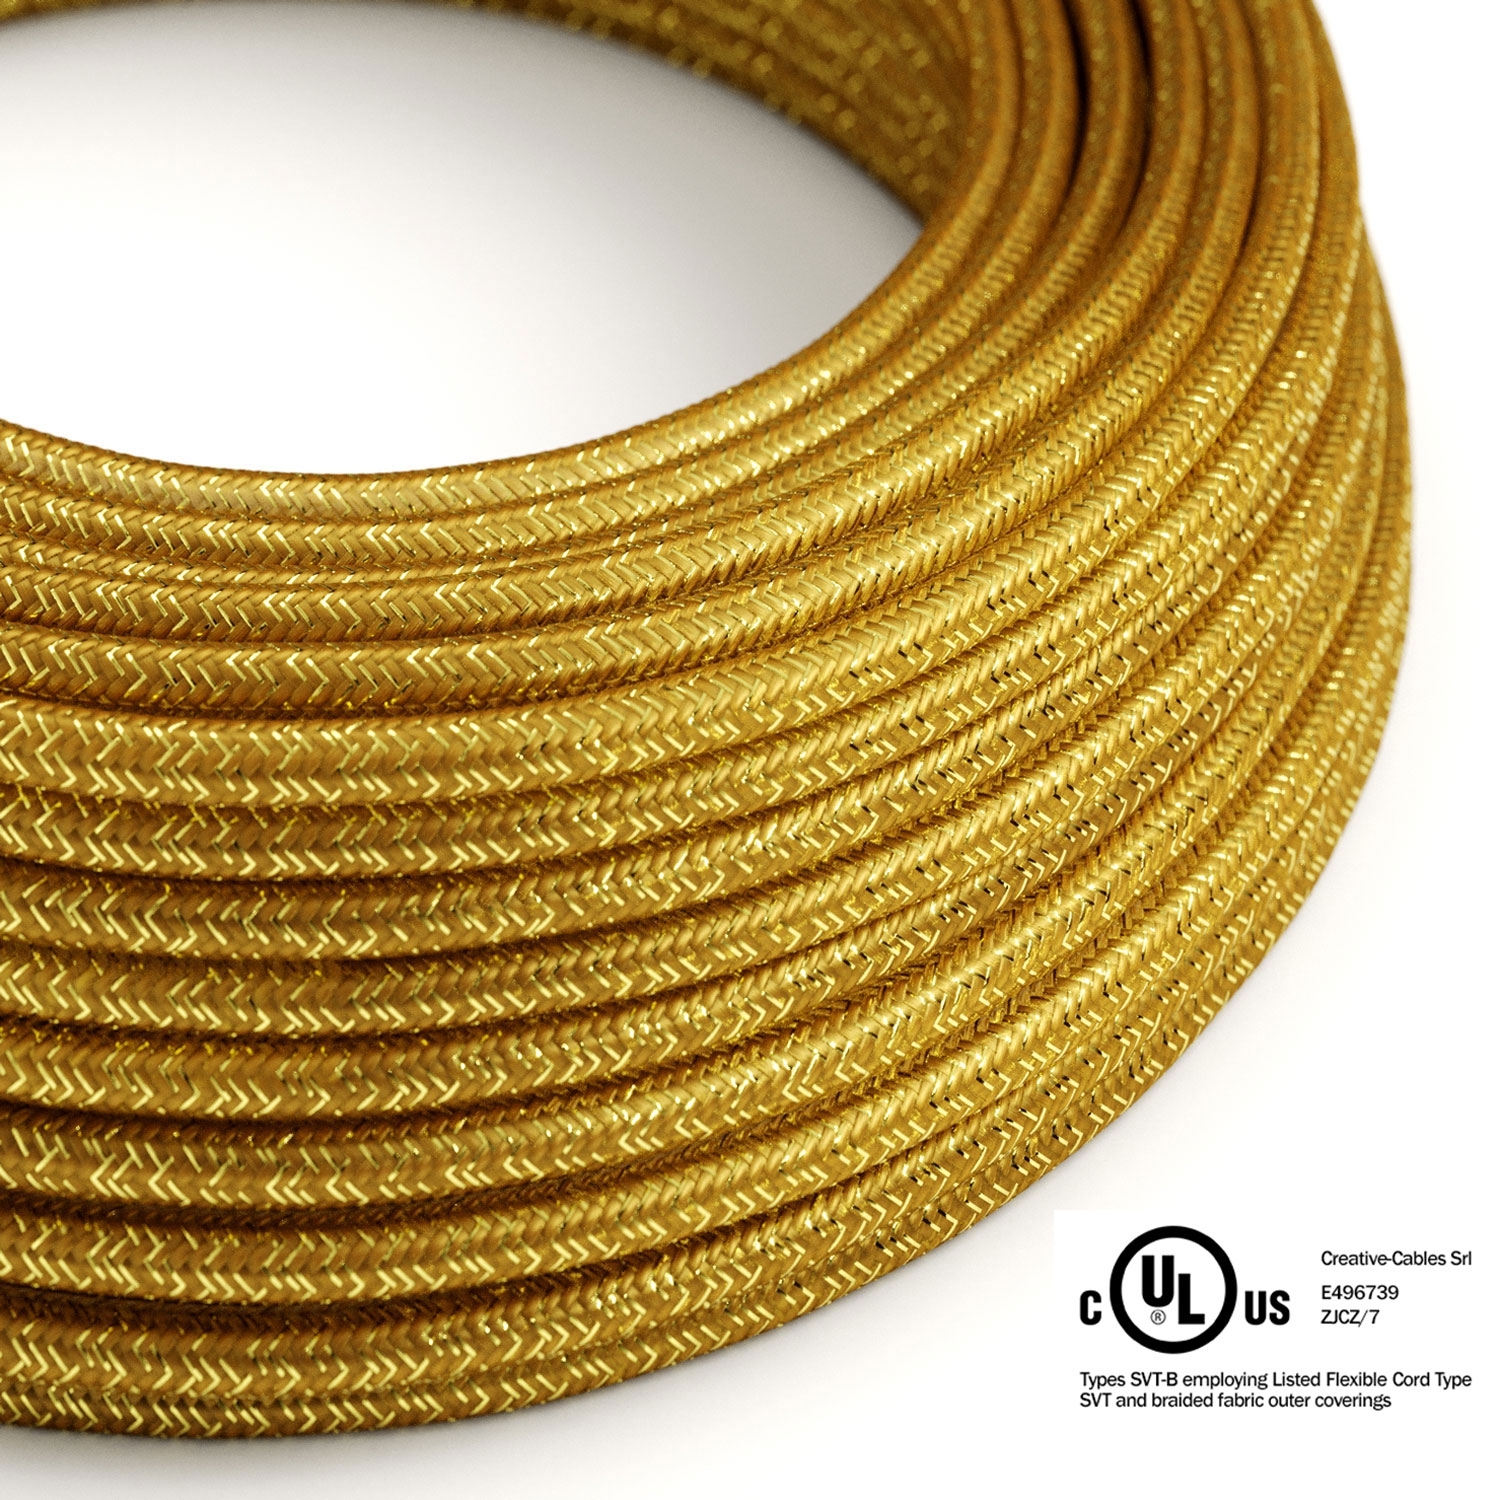 Gold Glitter covered Round electric cable - RL05